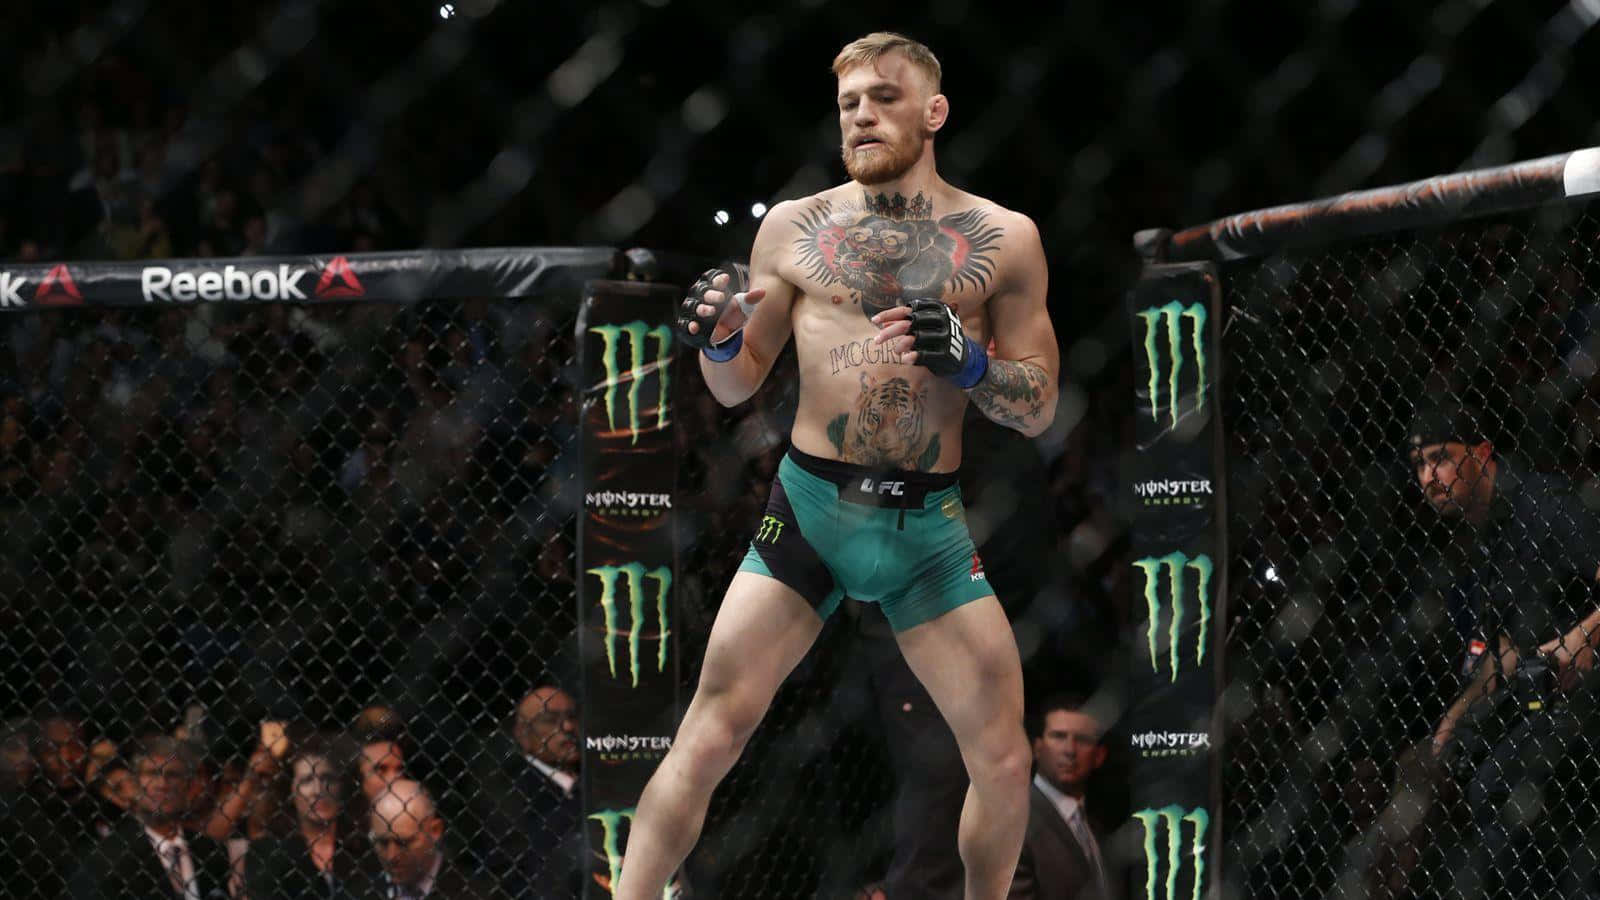 Conor McGregor rises above the competition